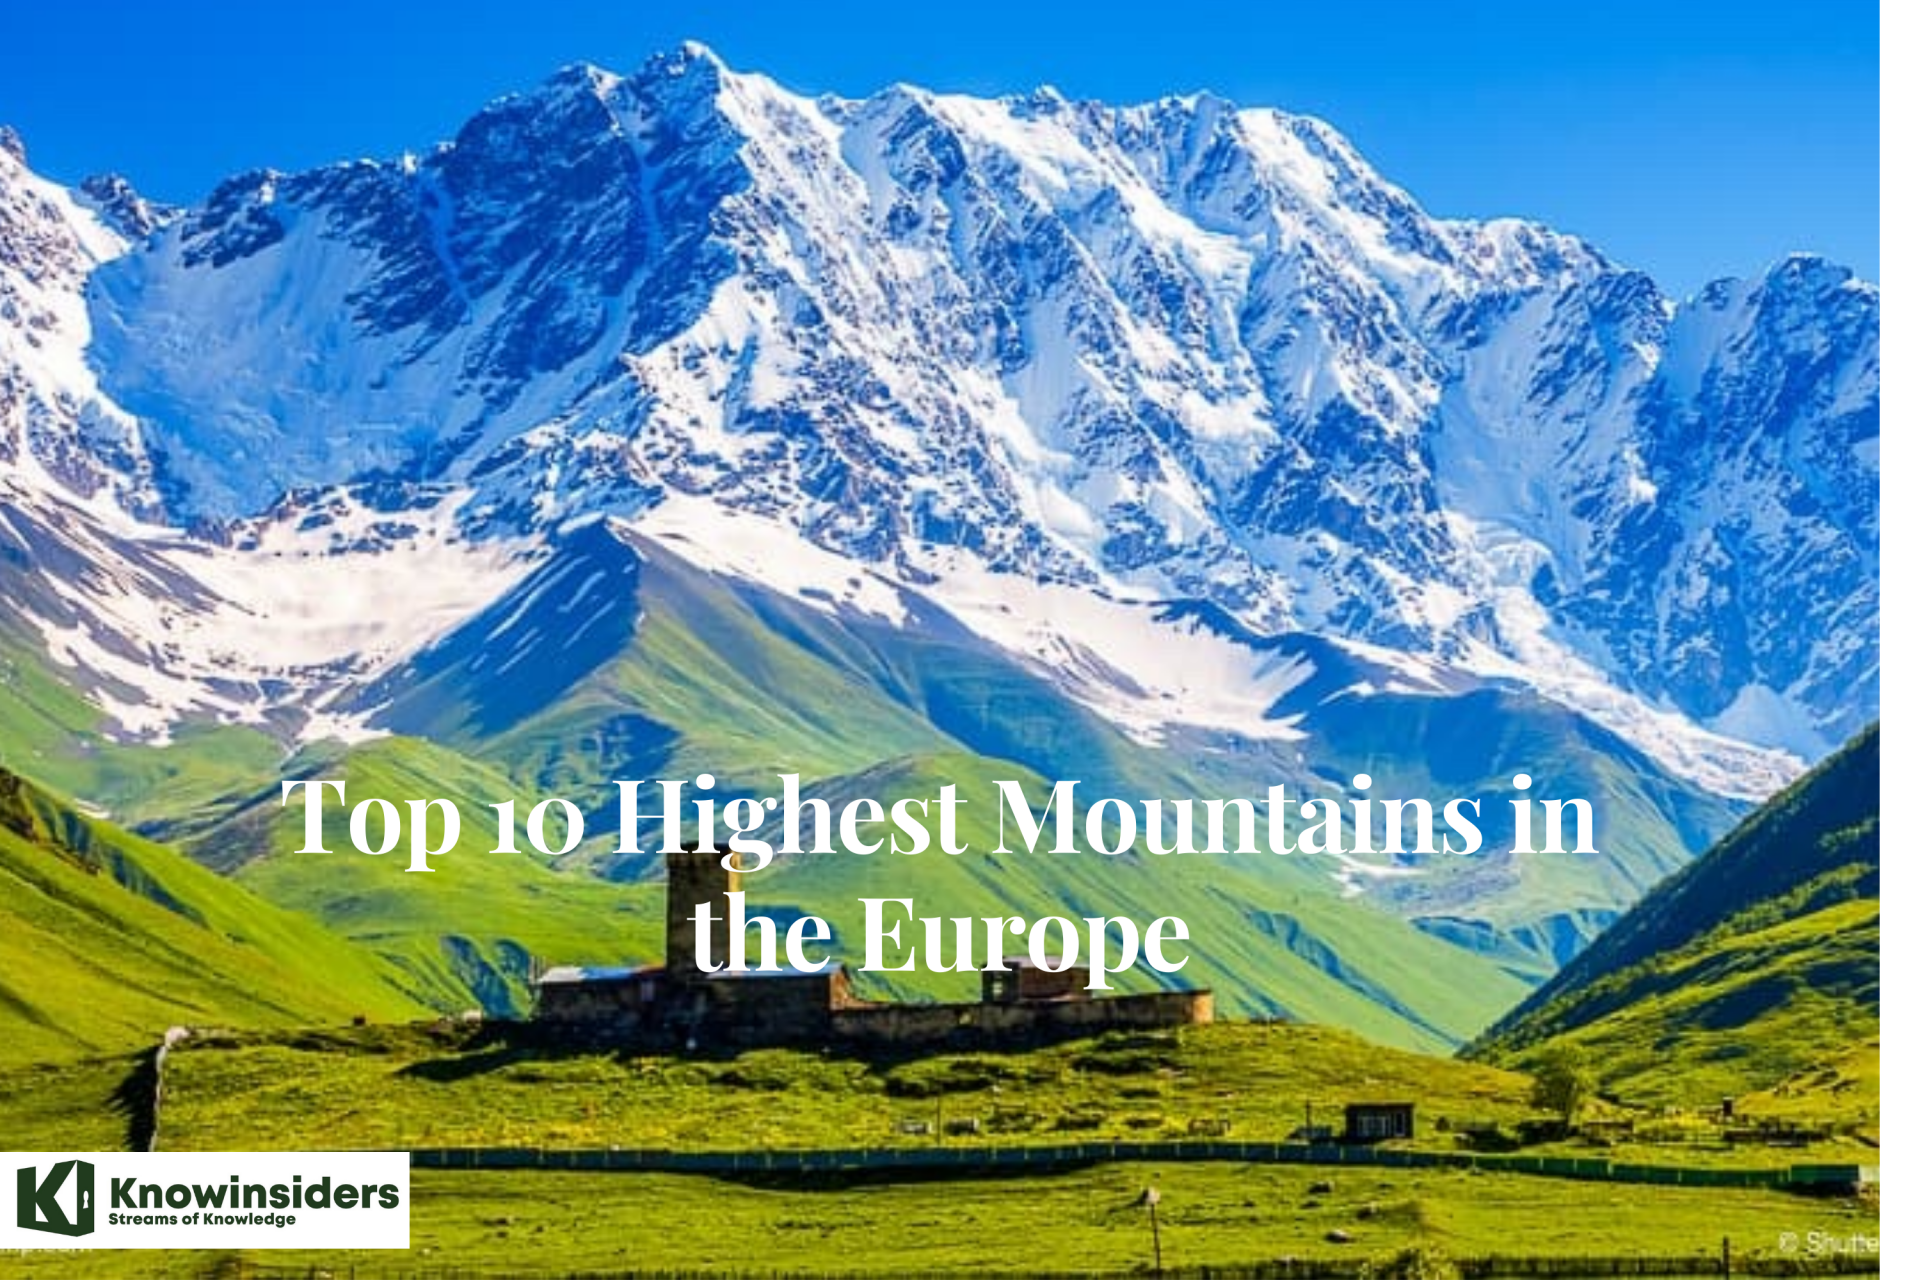 Top 10 Highest Mountains in Europe